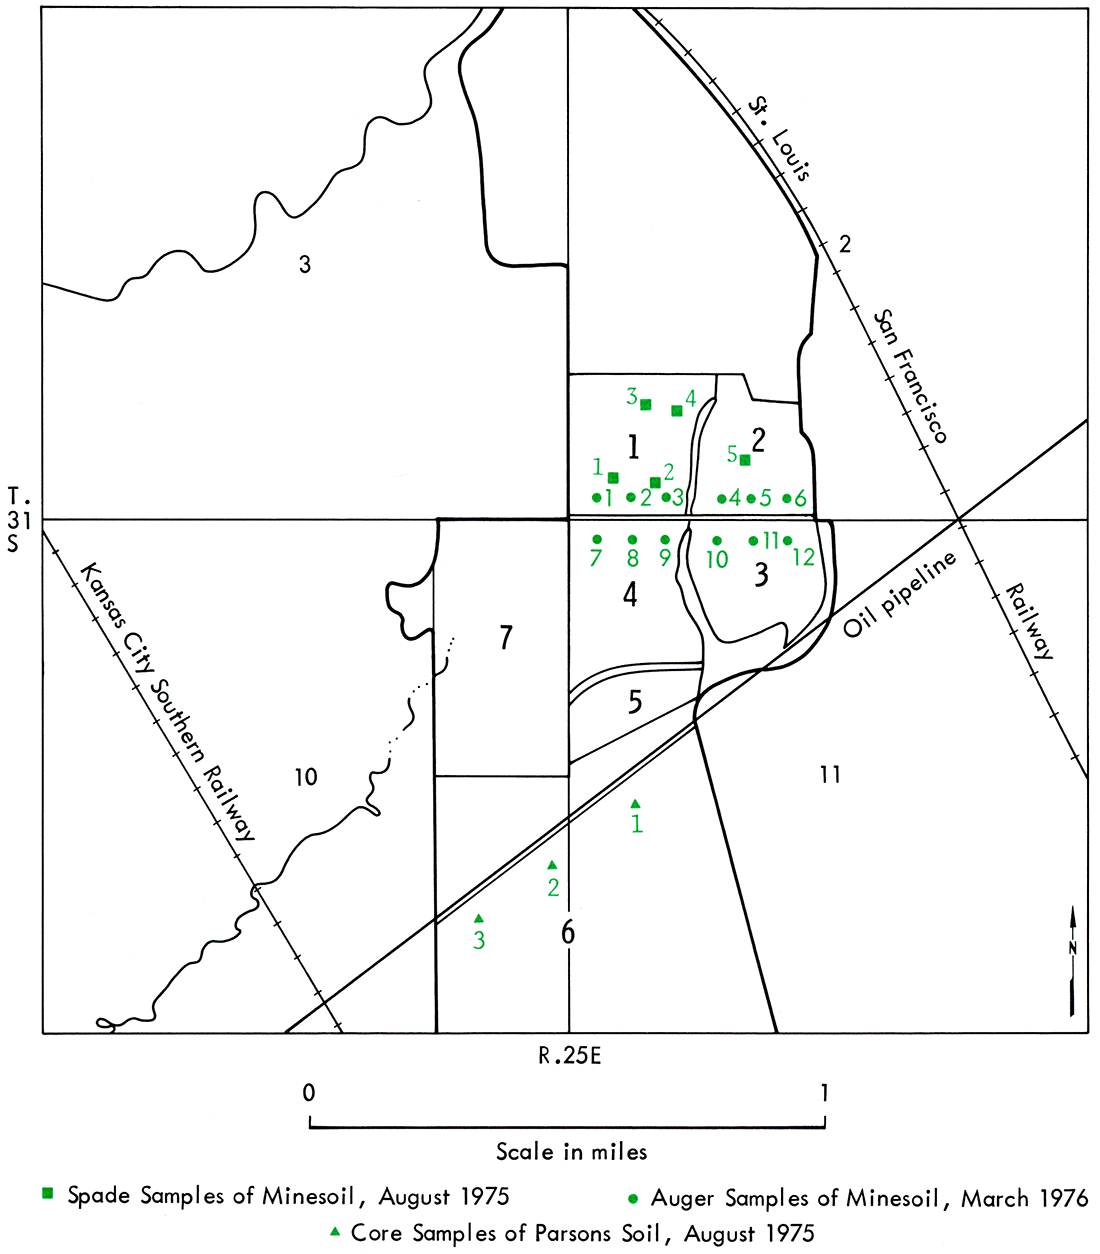 Map of location of soil samples taken for physical and chemical analyses of minesoil.